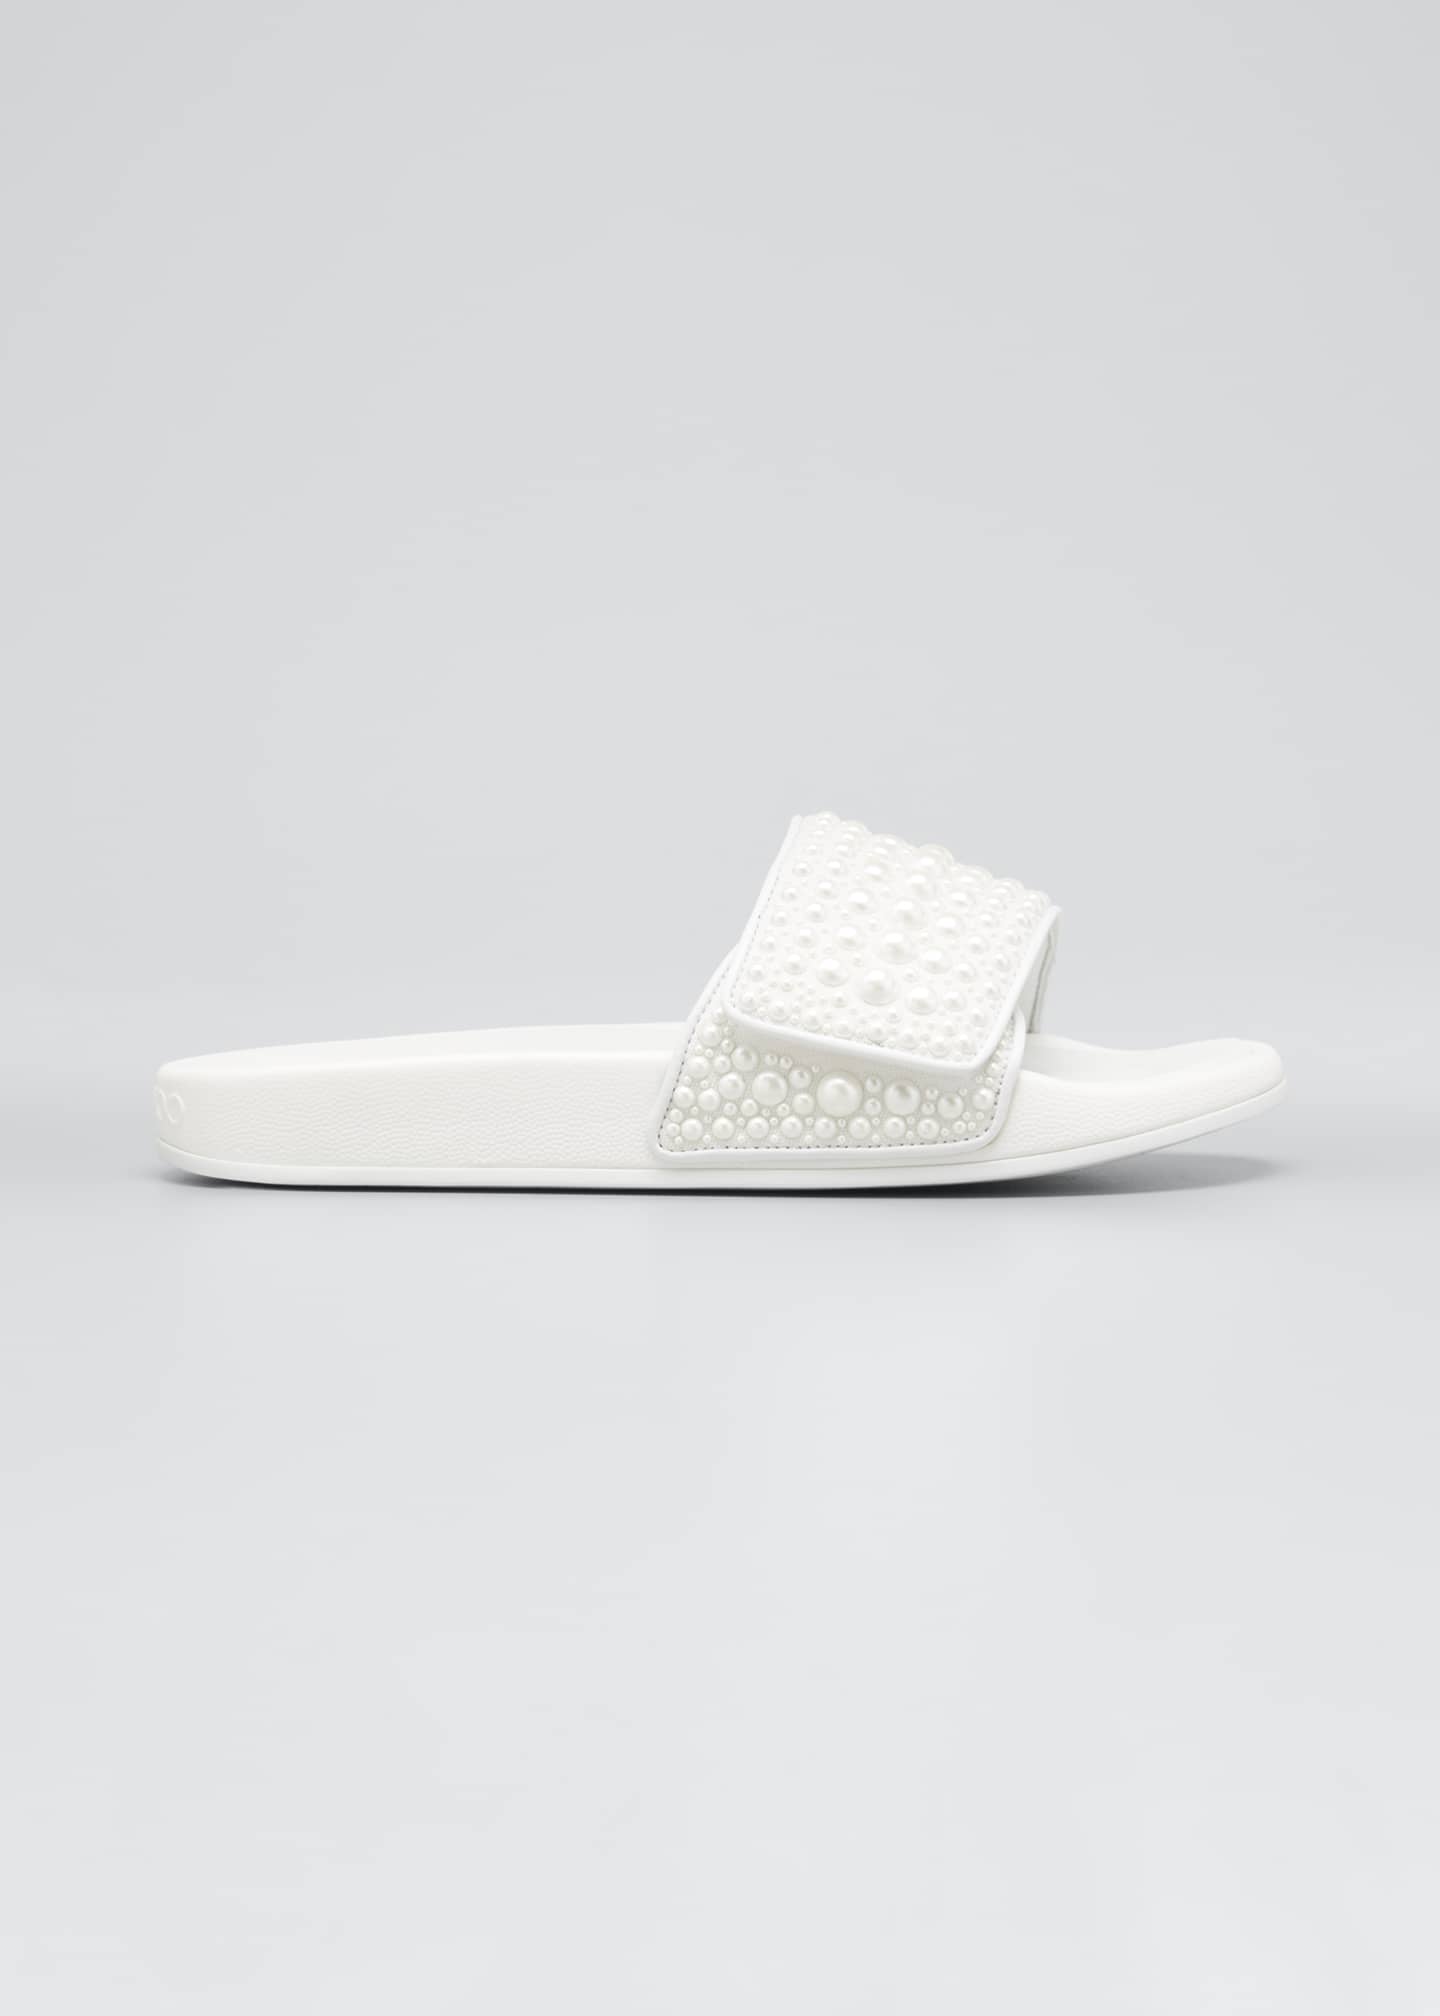 Jimmy Choo Fitz Pearly Stud Pool Sandals, White Image 1 of 3